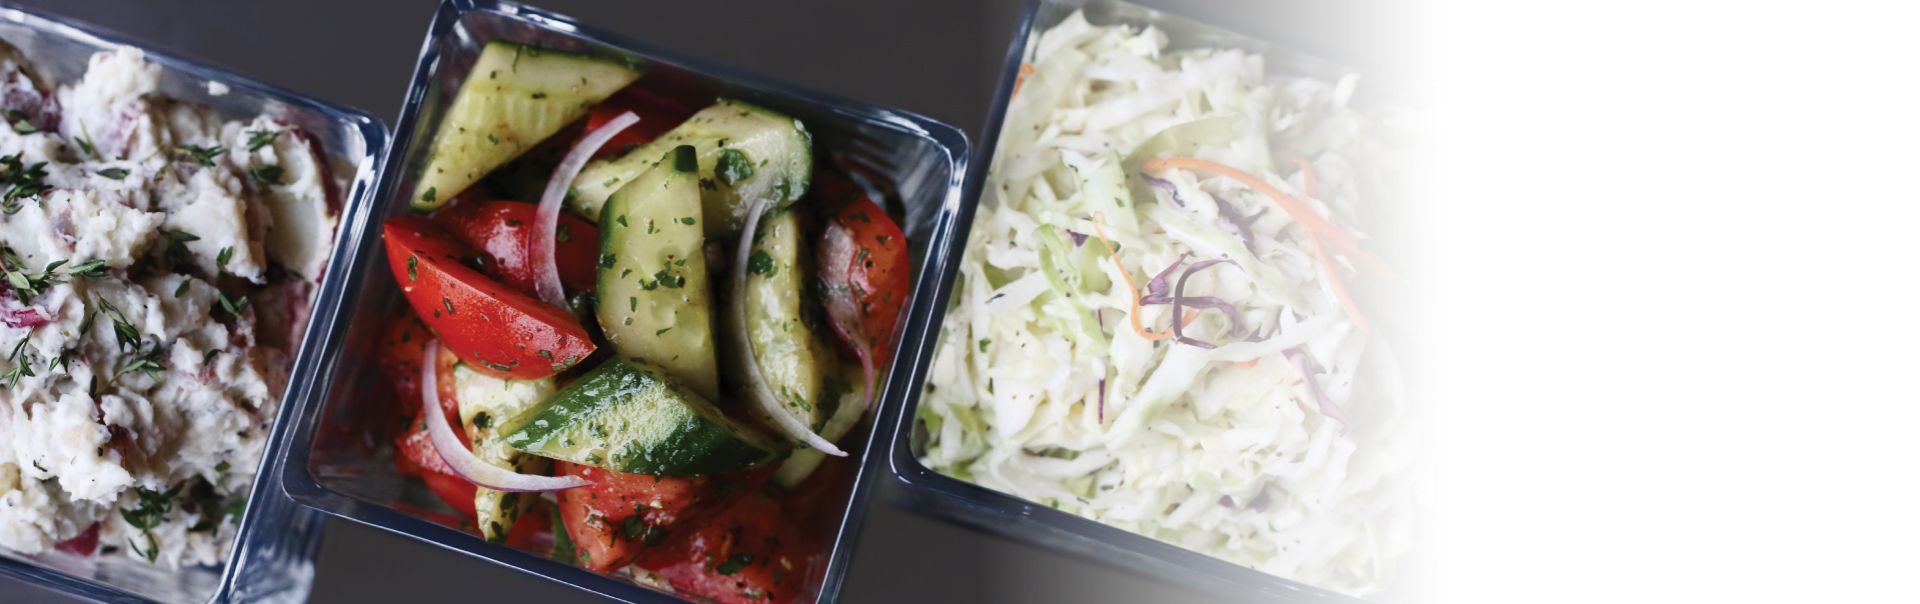 containers with salads